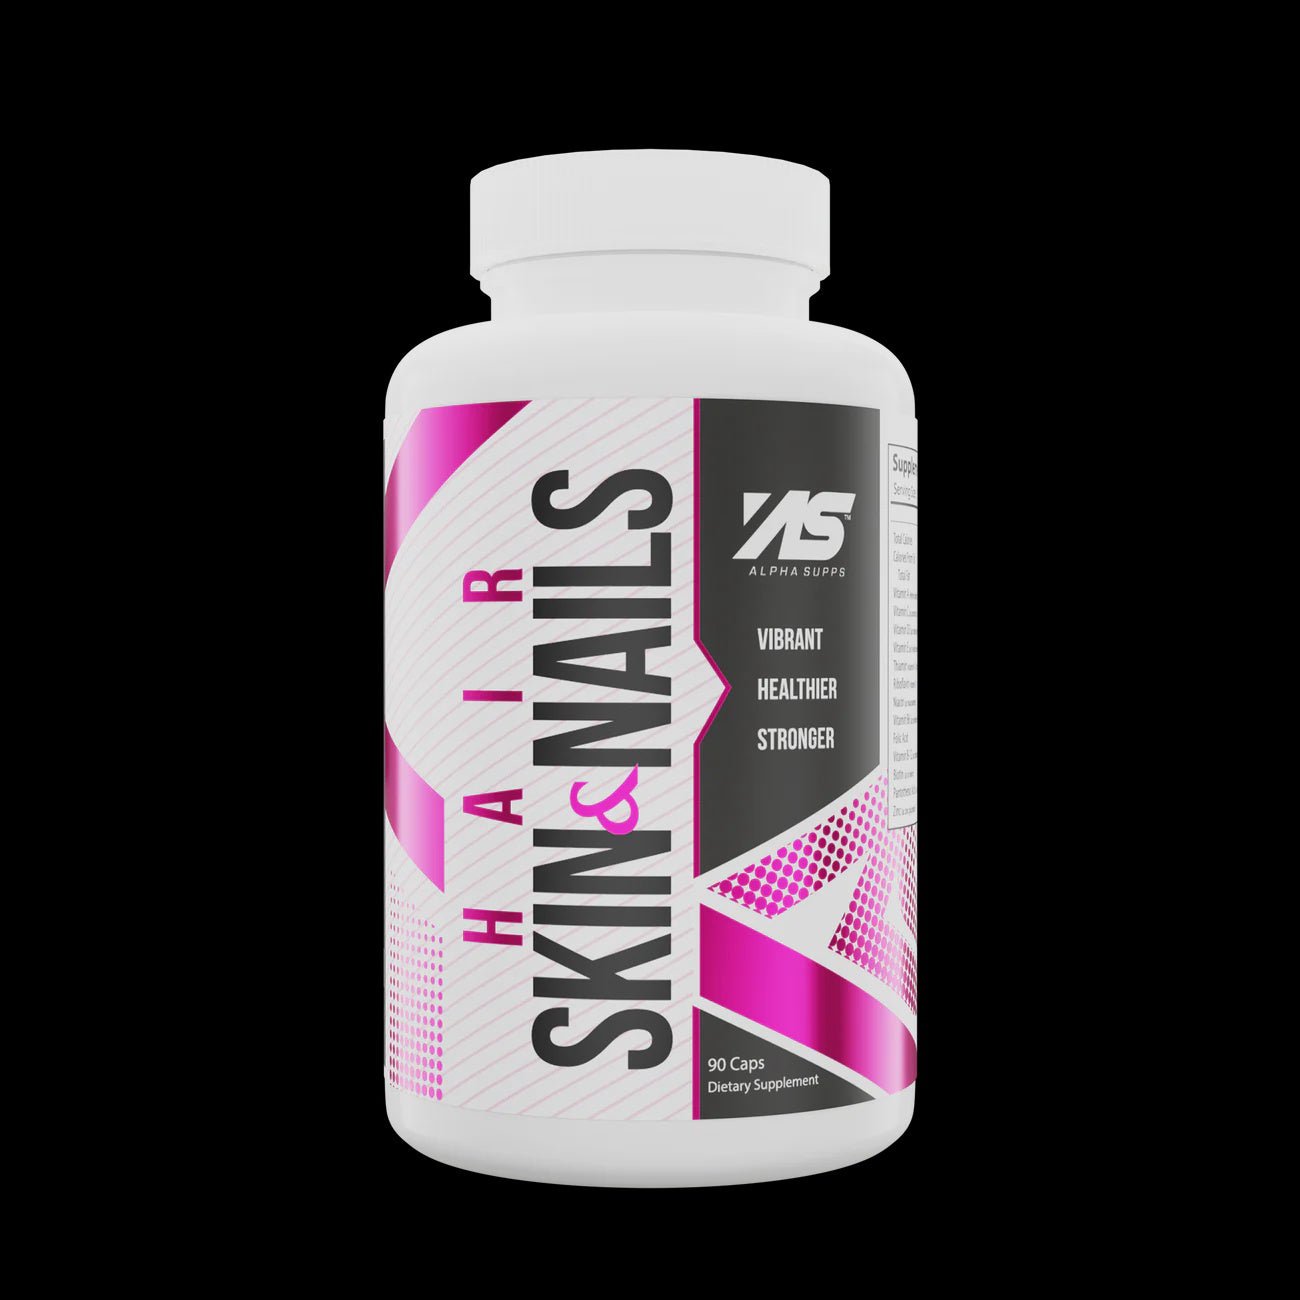 Alpha Supps - Hair, Skin and Nails - Krazy Muscle Nutrition Alpha supps10365